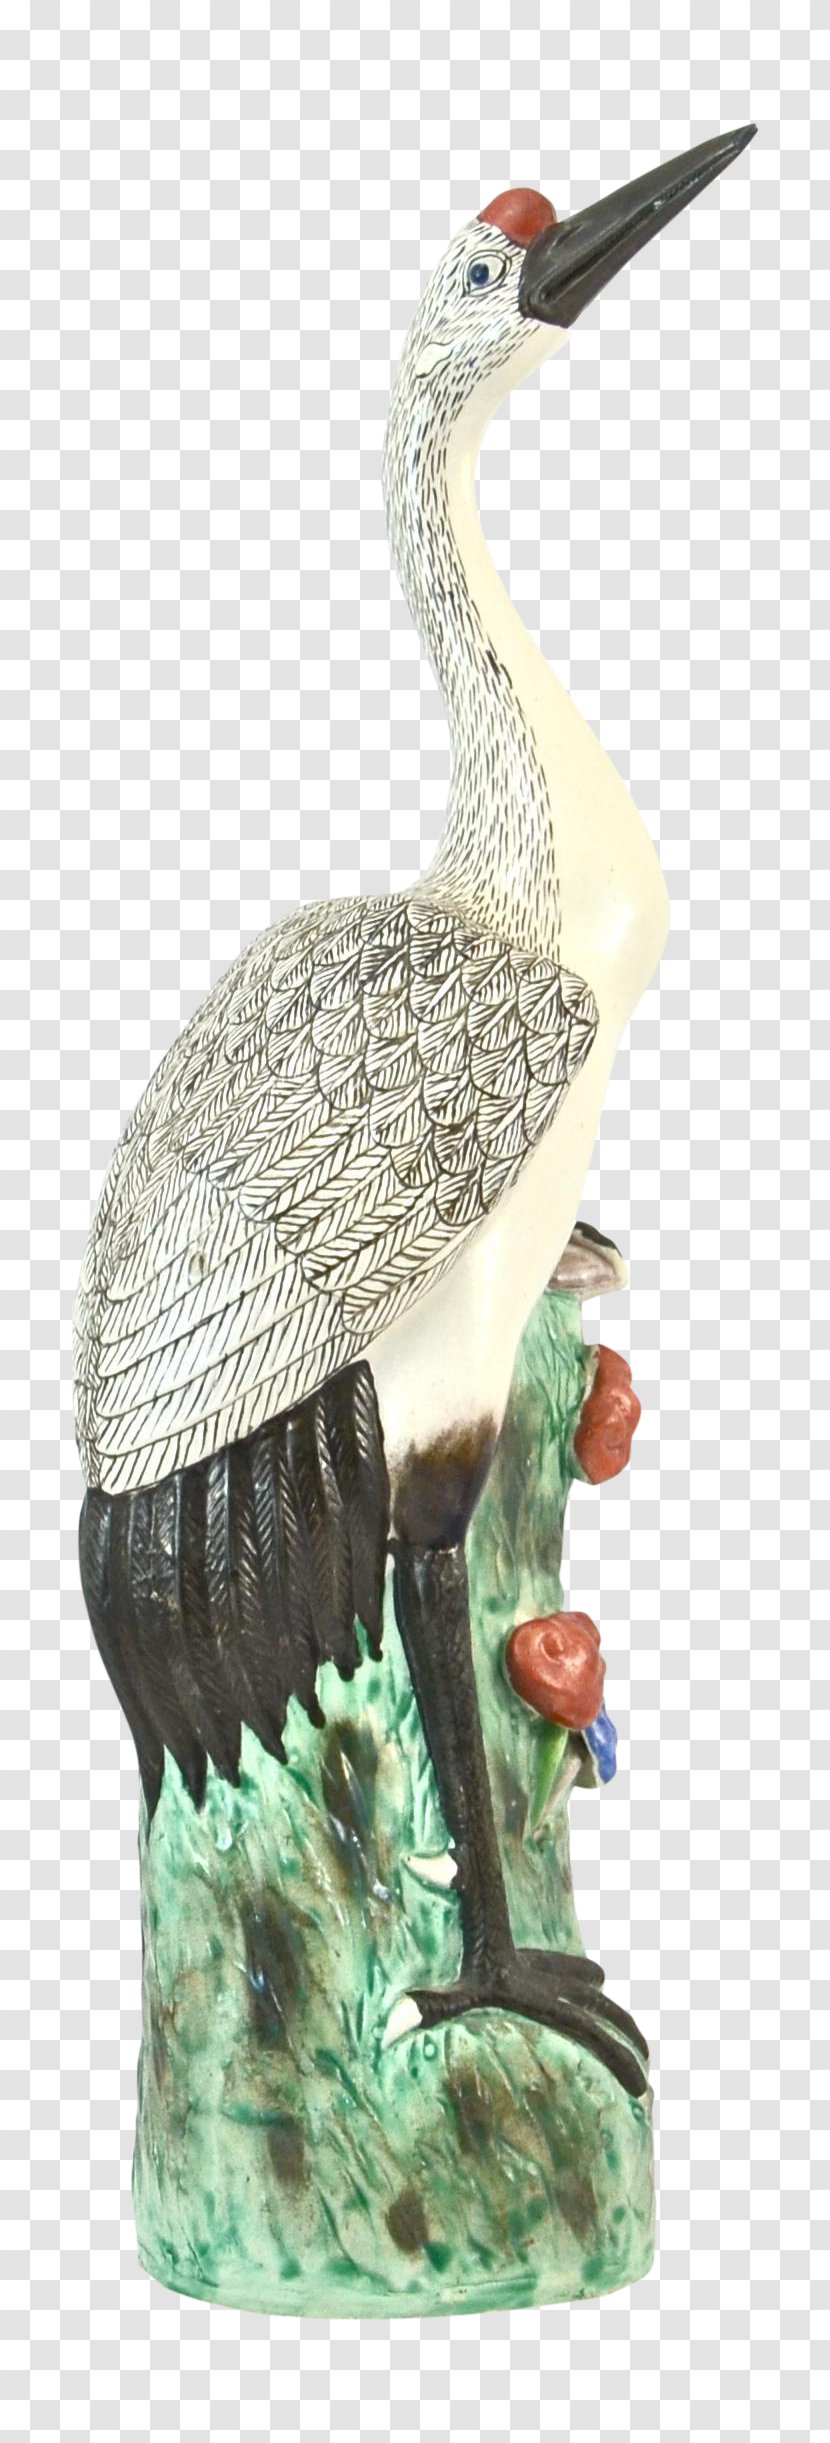 Statue Crane In Chinese Mythology Sculpture Figurine - Seabird Transparent PNG